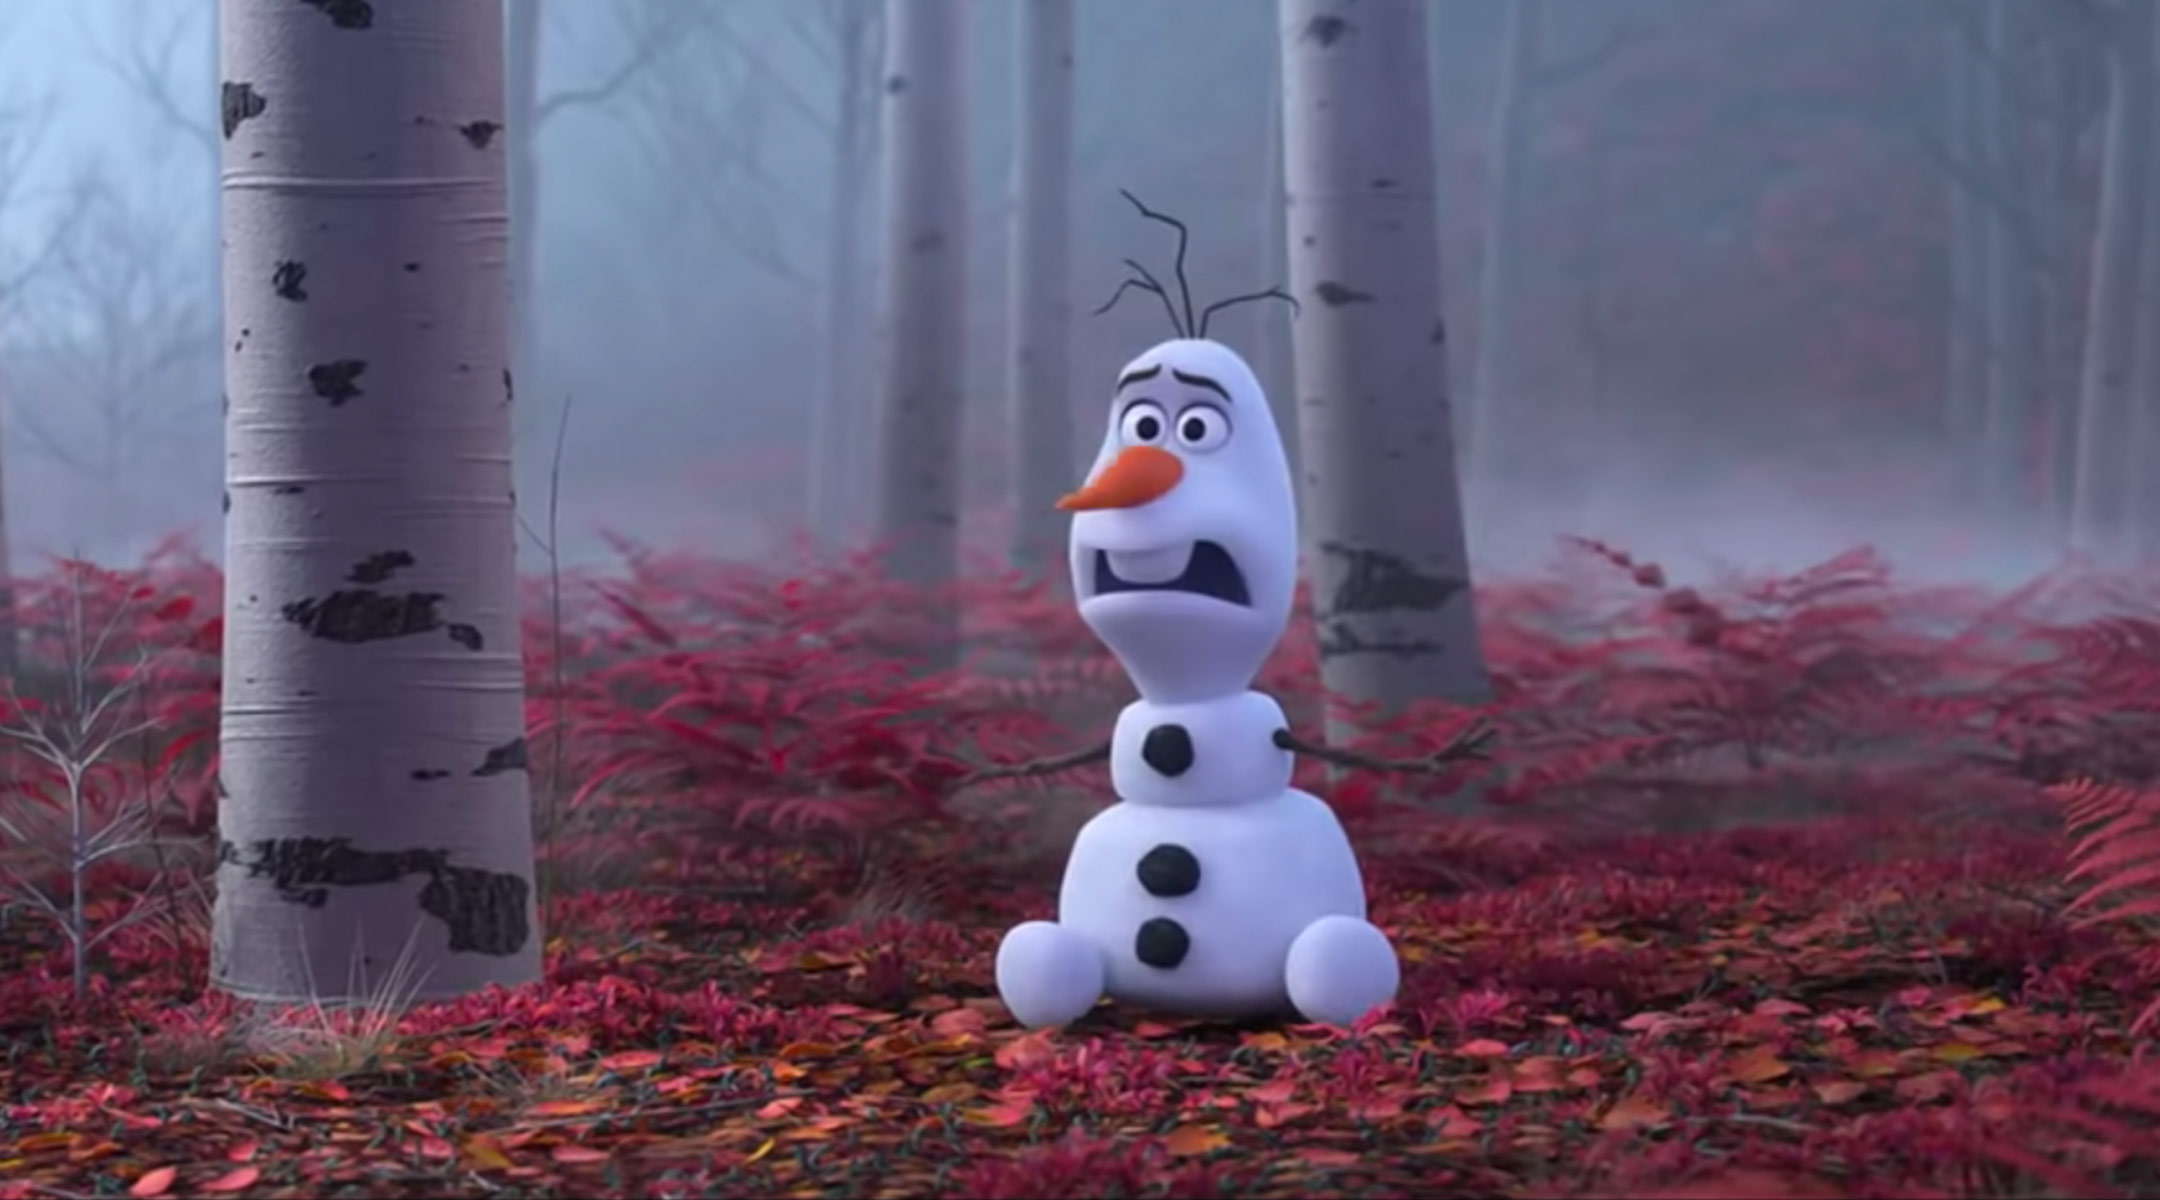 olaf snow man character from the movie frozen